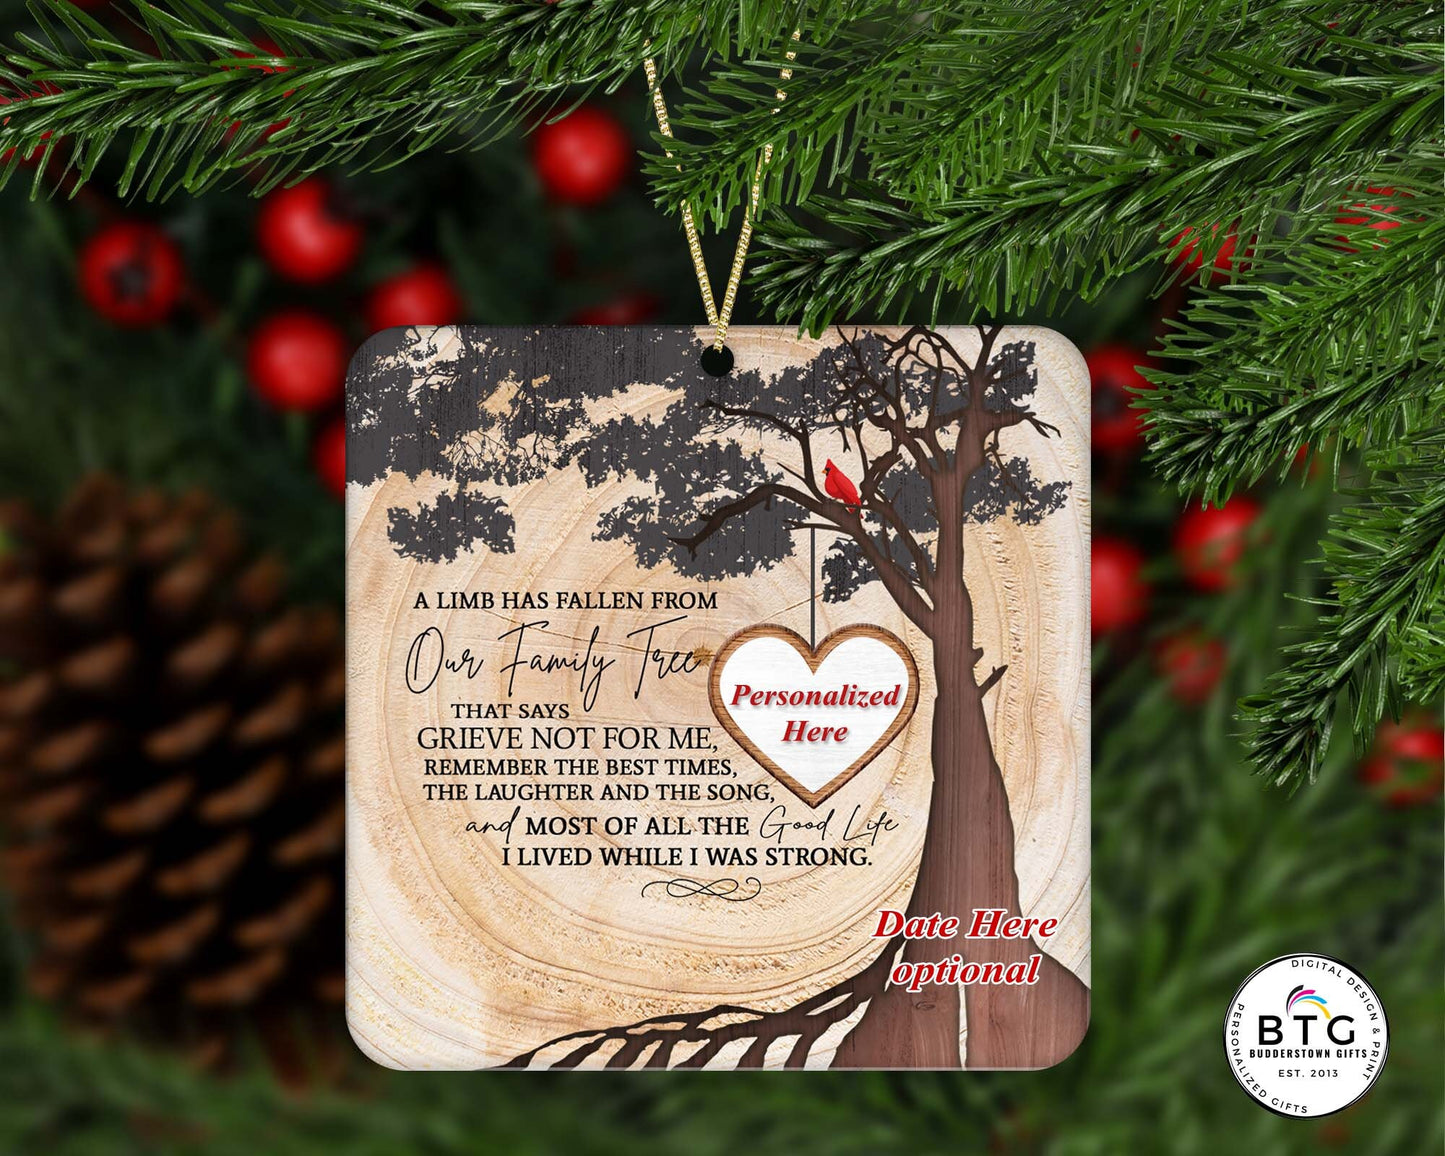 A limb has fallen from our family tree Ornament - Memorial Ornament, Cardinals, memorial gift, sympathy gift, Personalized Ornament